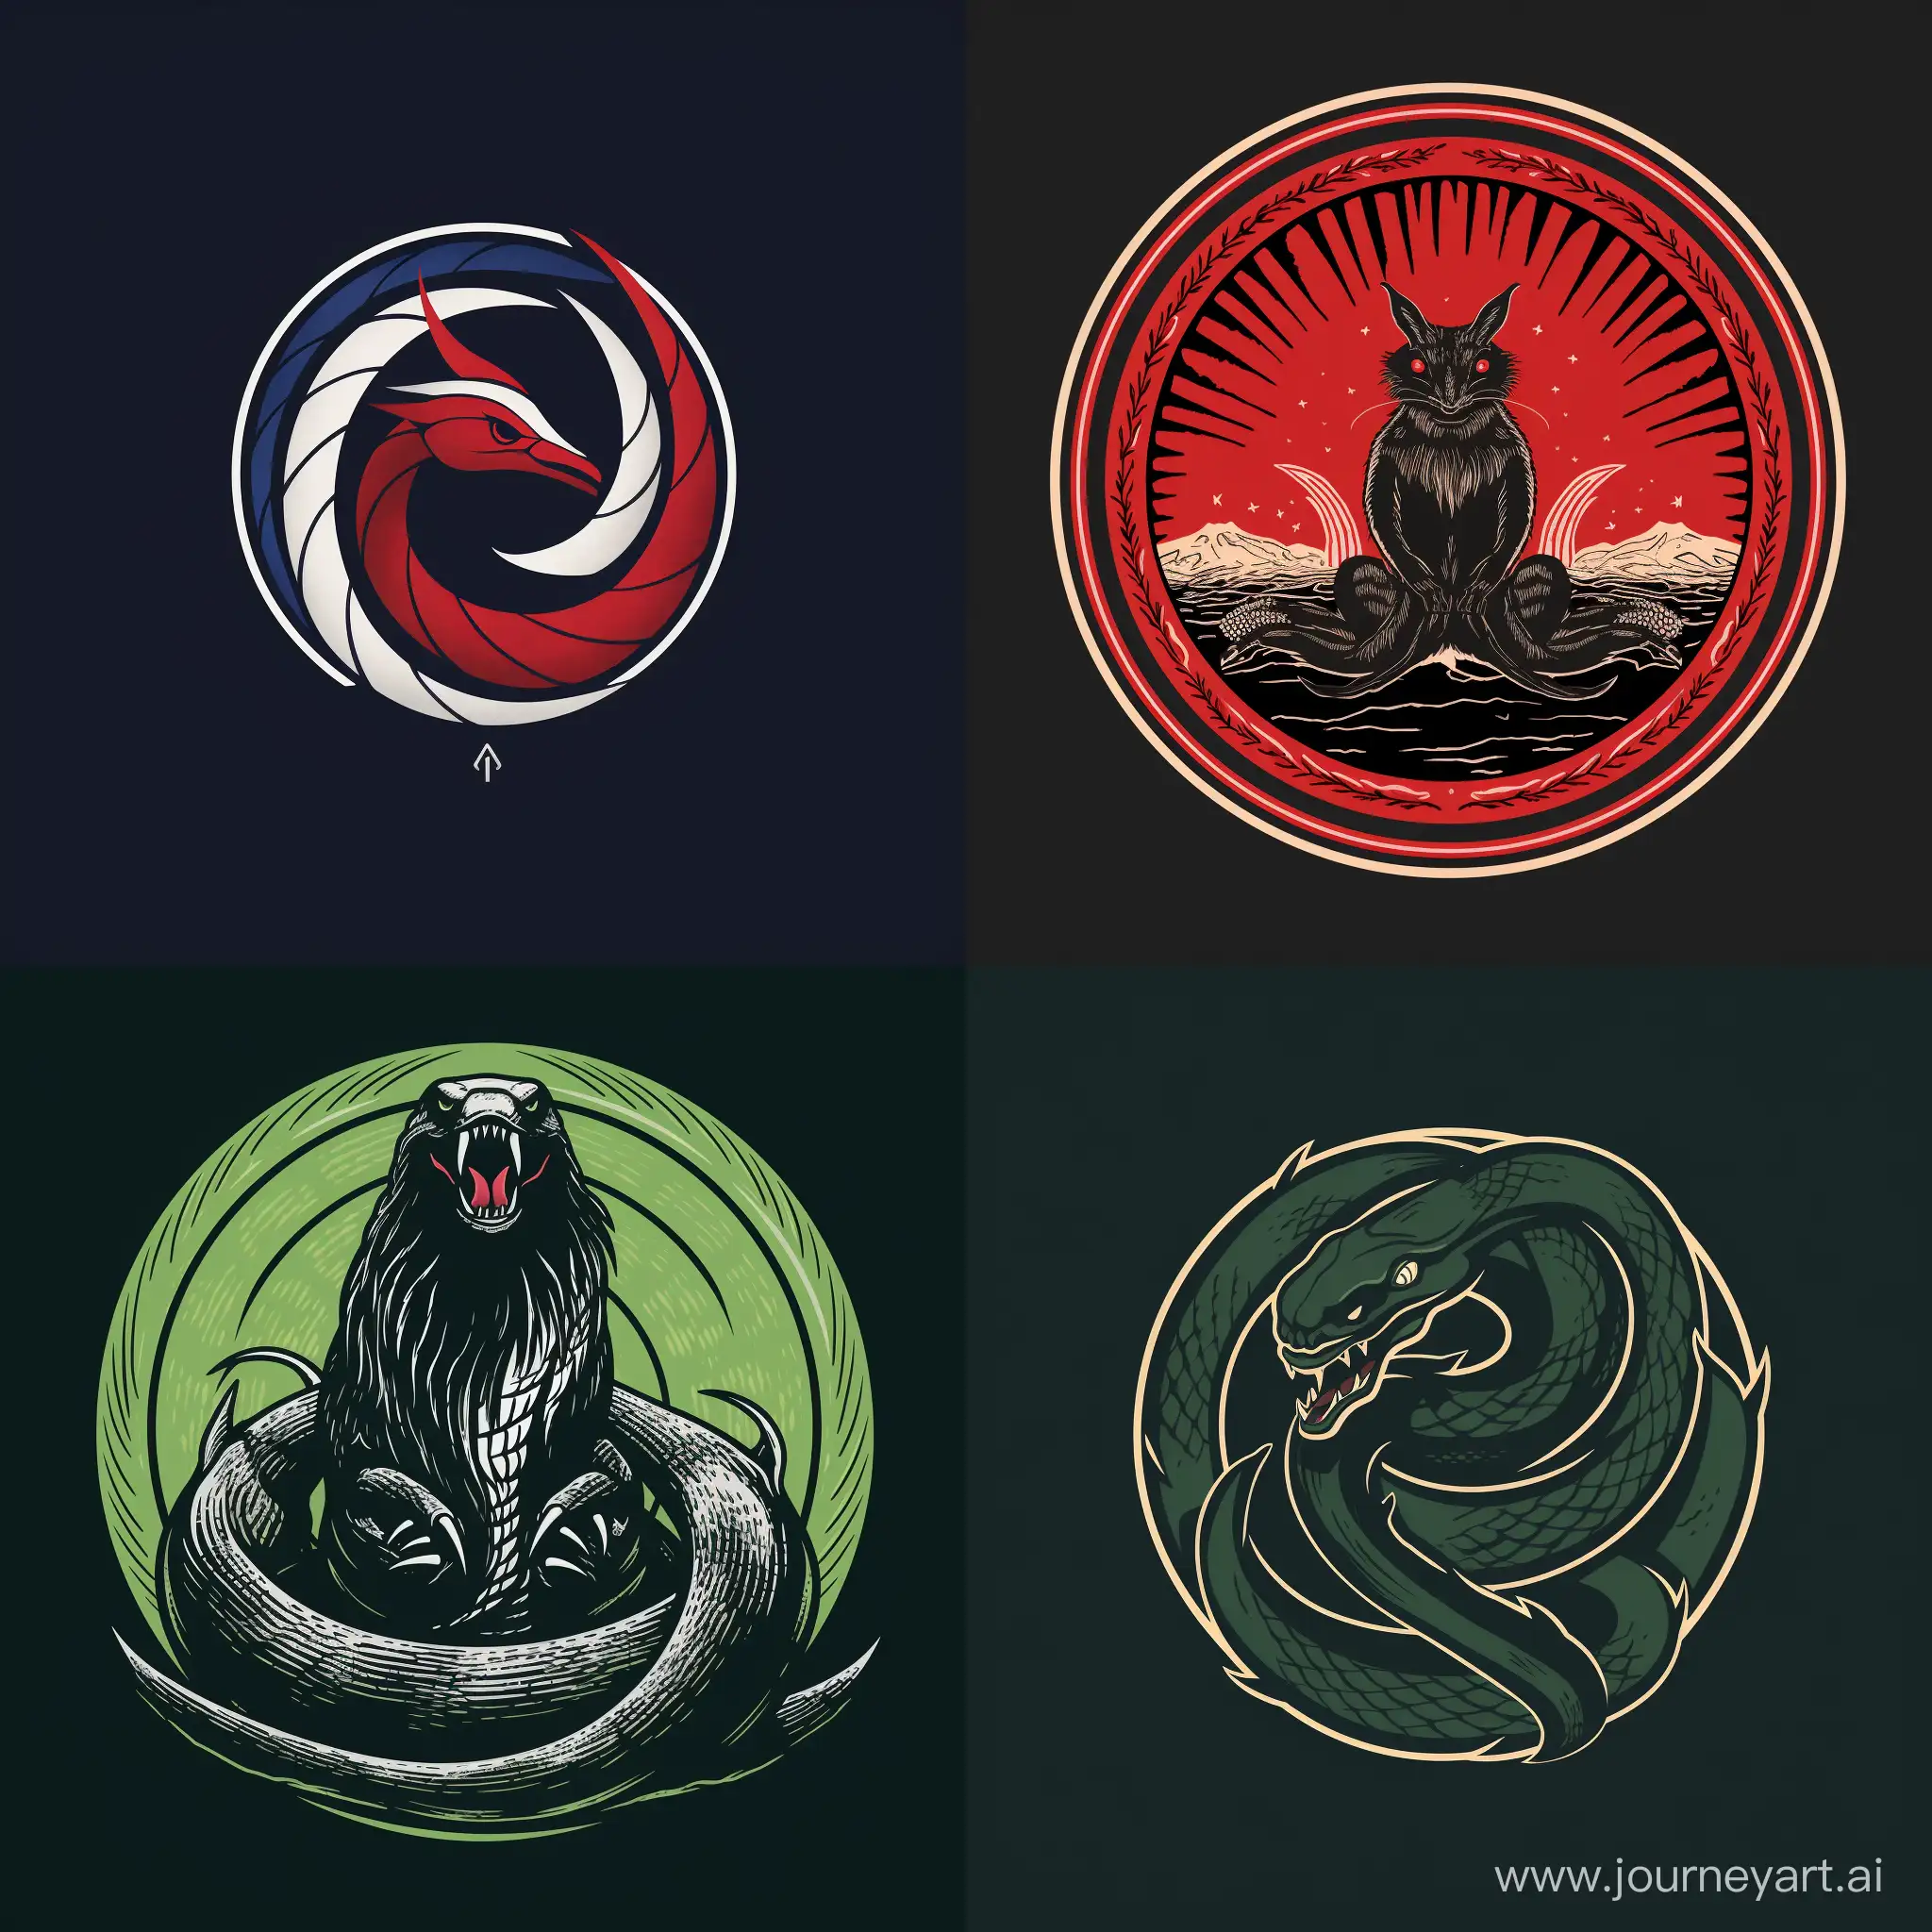 Society-of-the-RatEating-Snake-Emblem-Artistic-Logo-Design-with-AR-Element